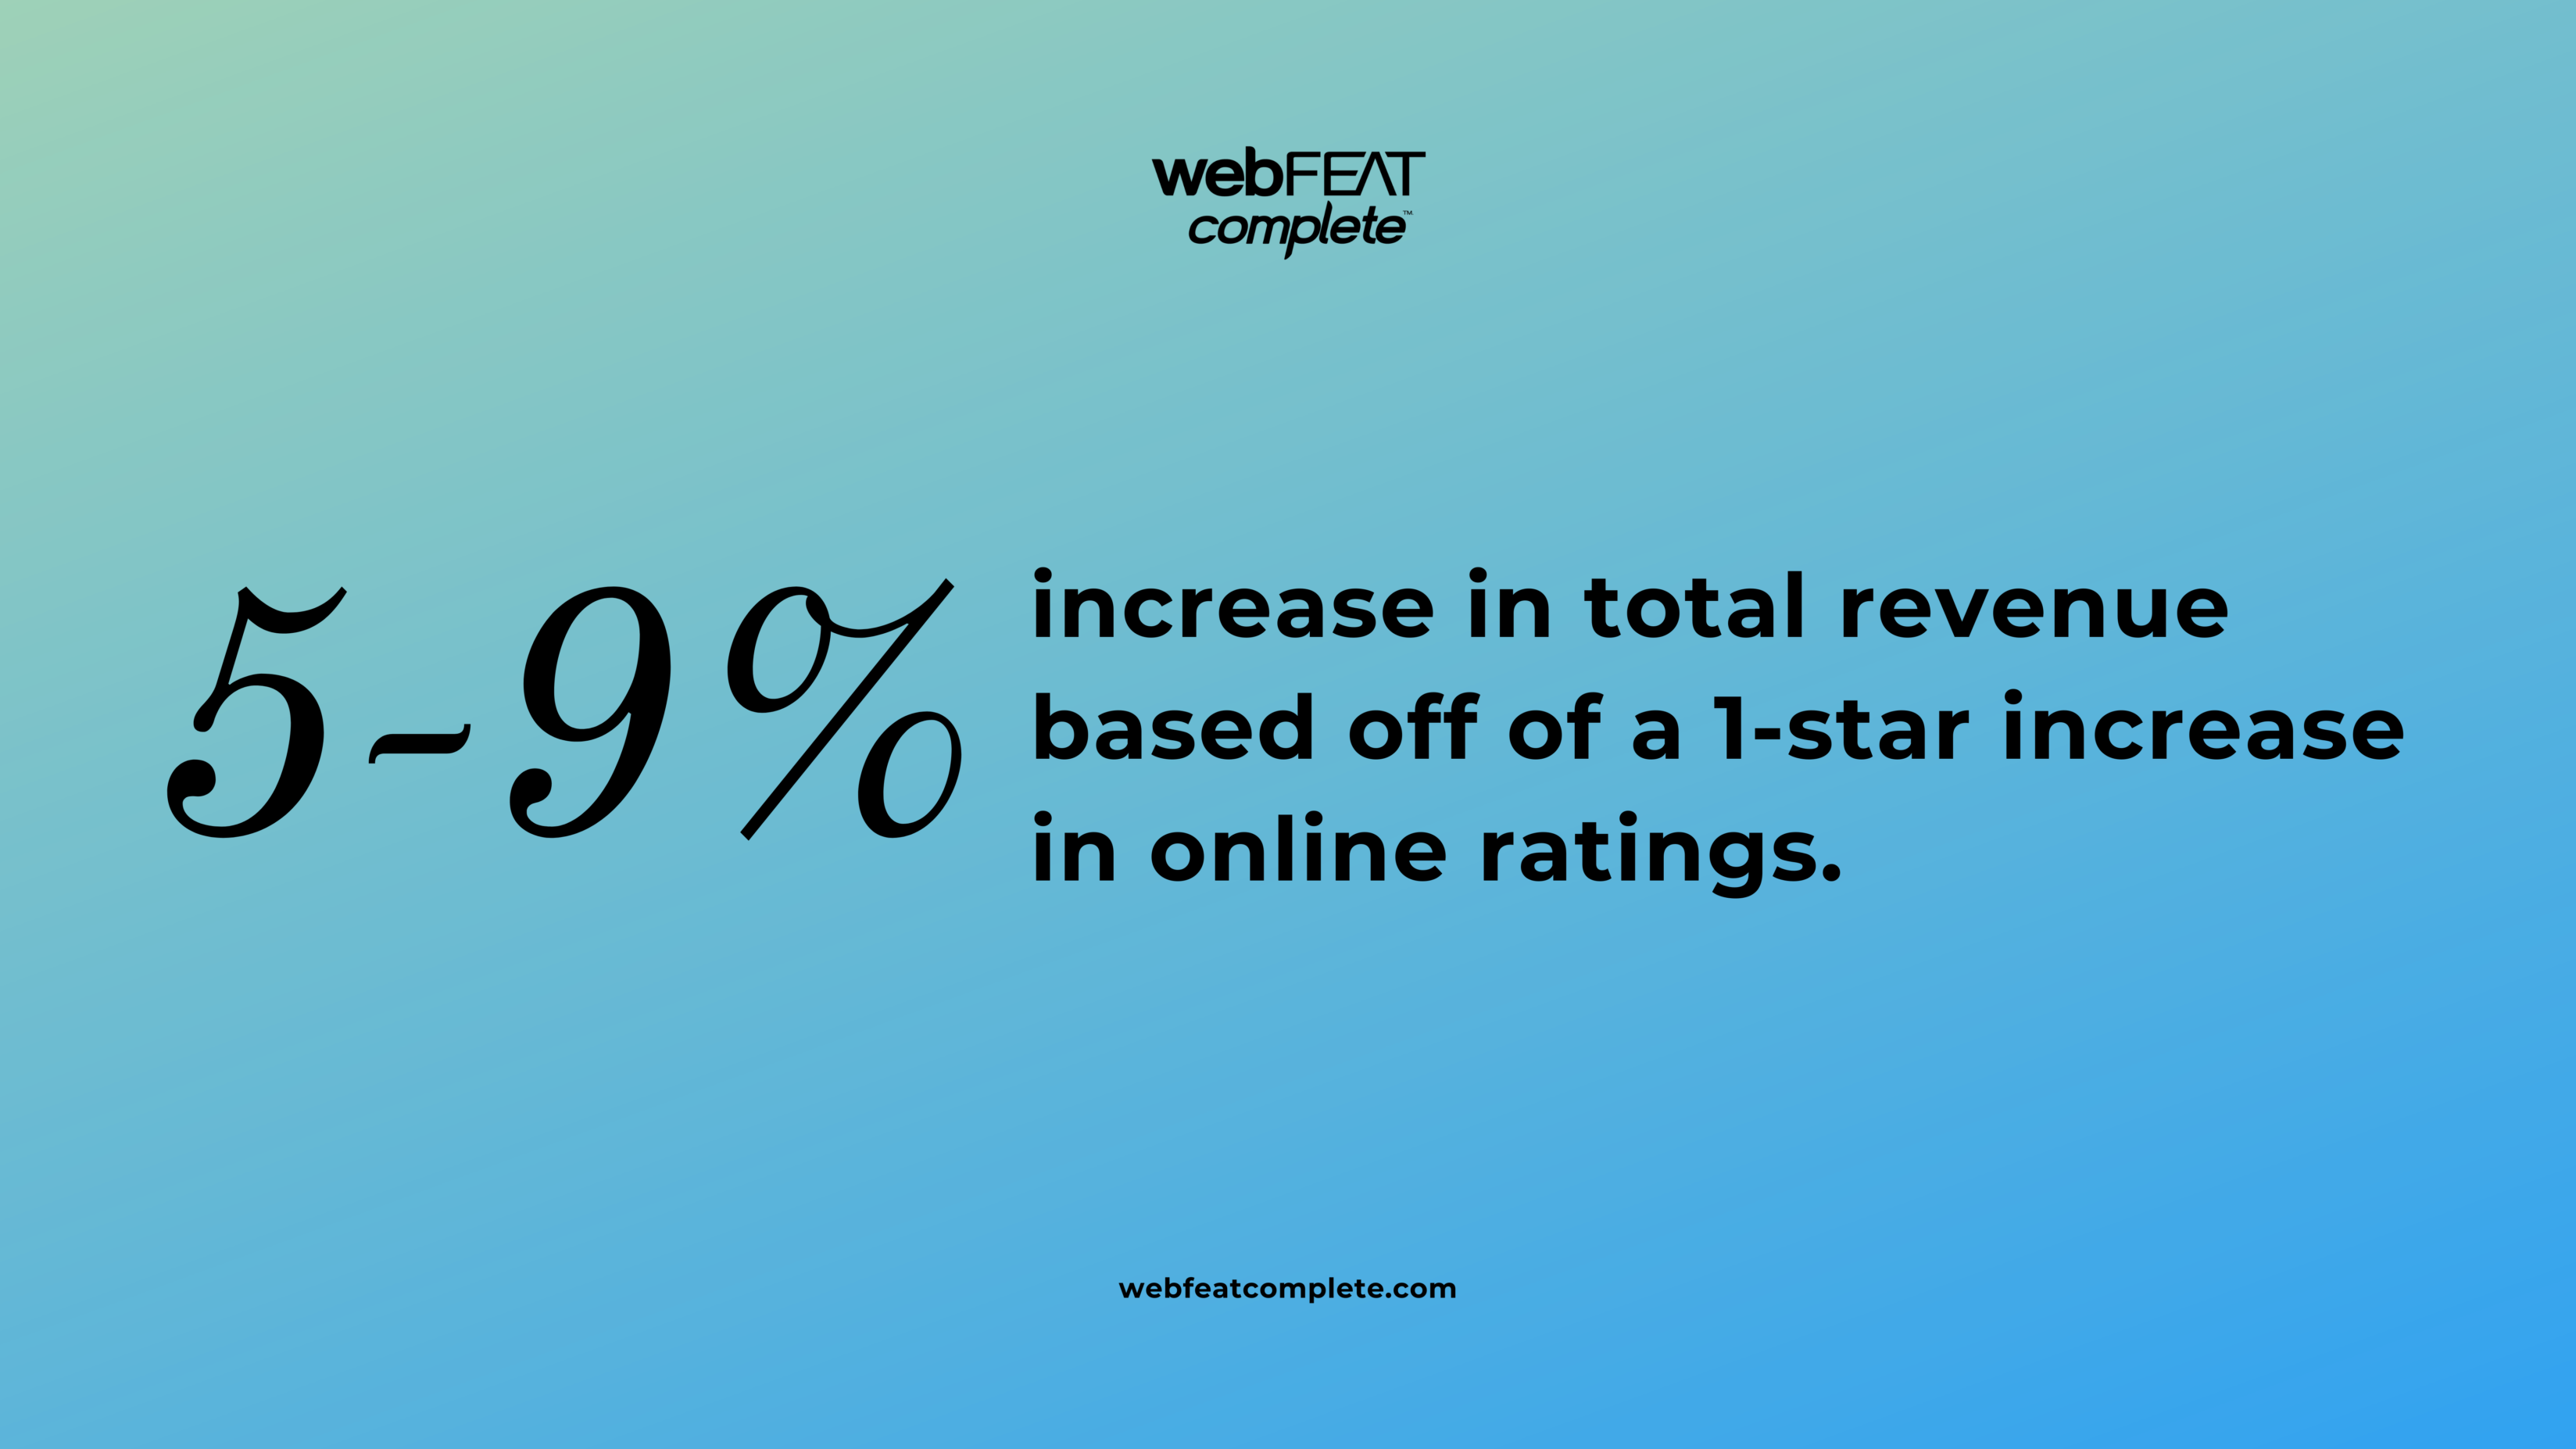 A one-star increase in a business's rating can lead to a 5-9% increase in revenue.